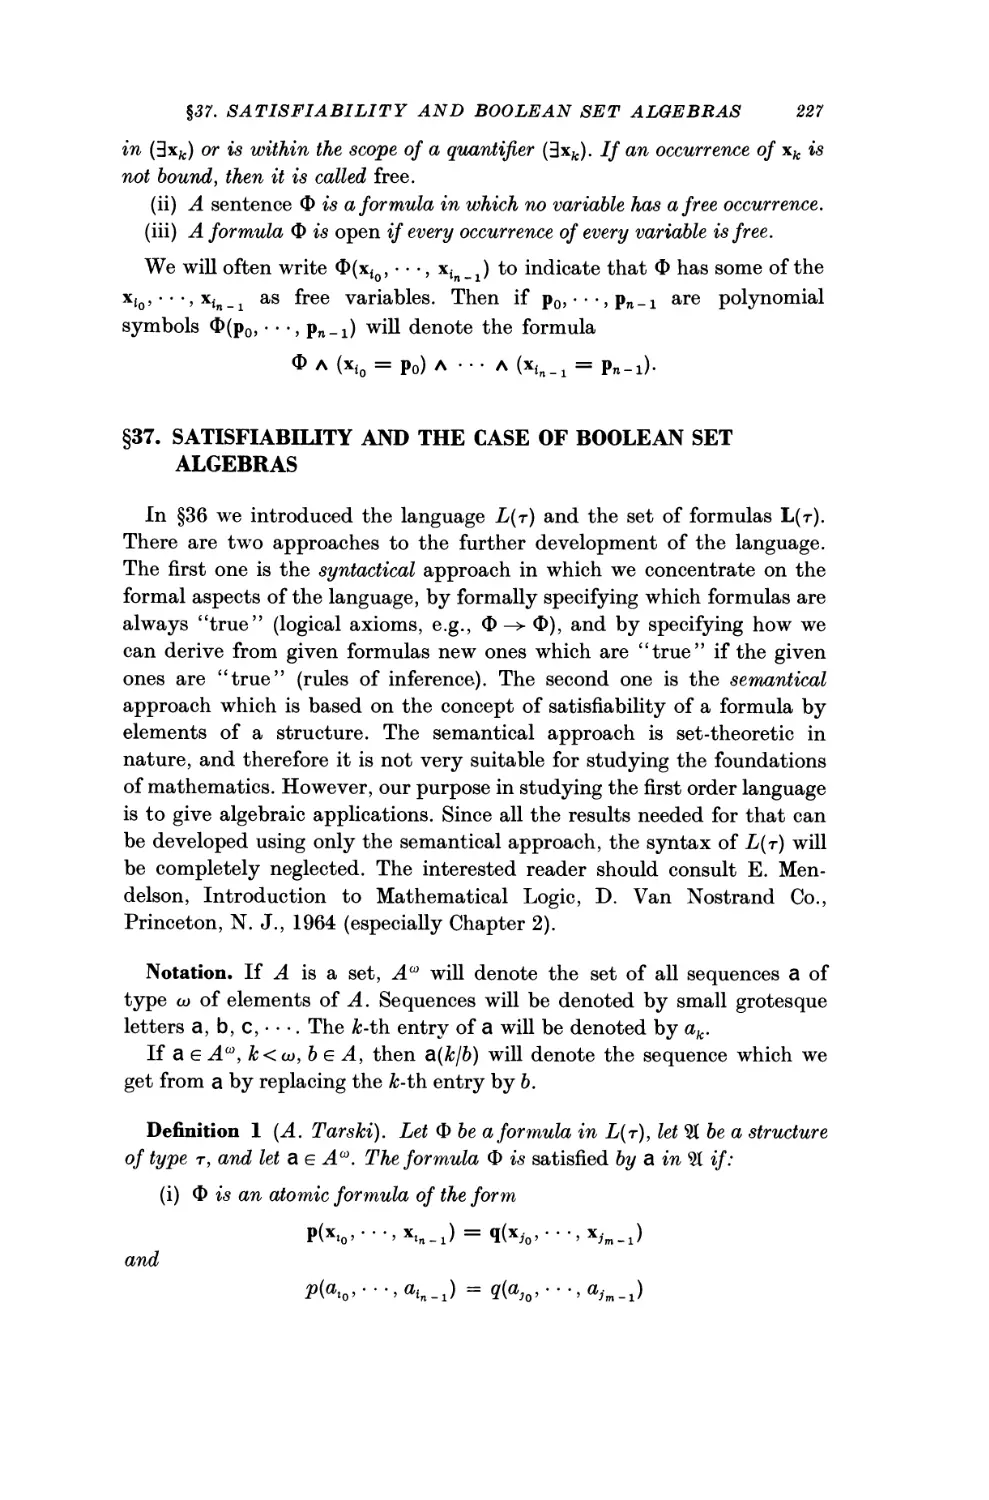 §37. Satisfiability and the Case of Boolean Set Algebras